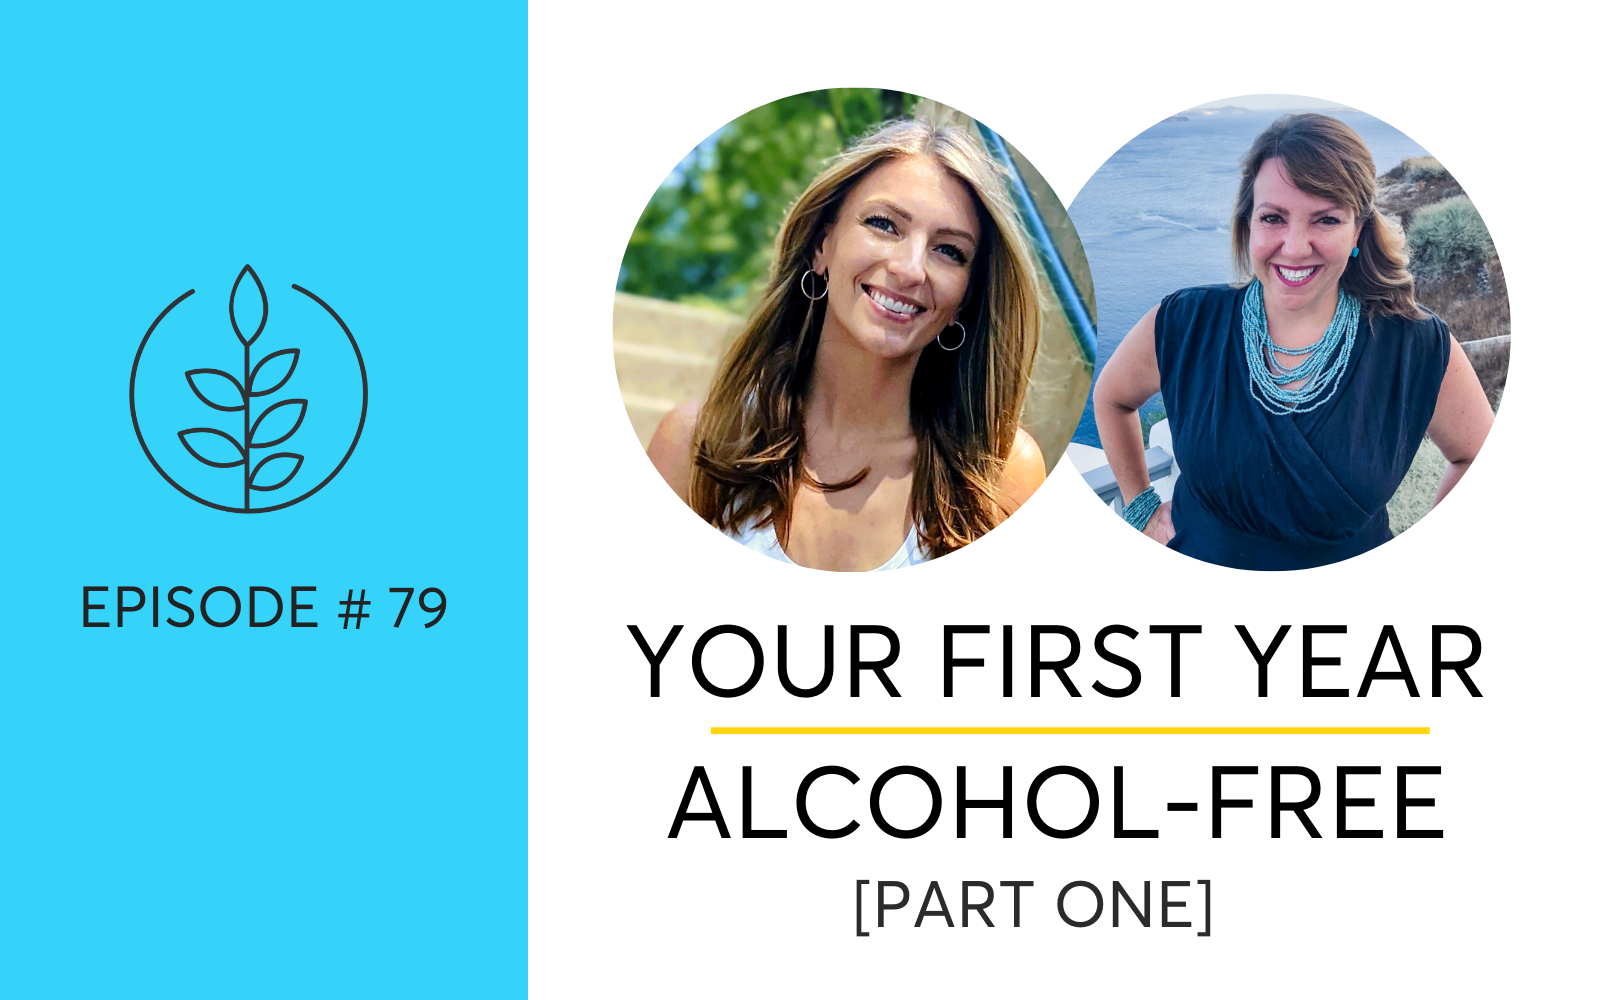 Your First Year Alcohol-Free